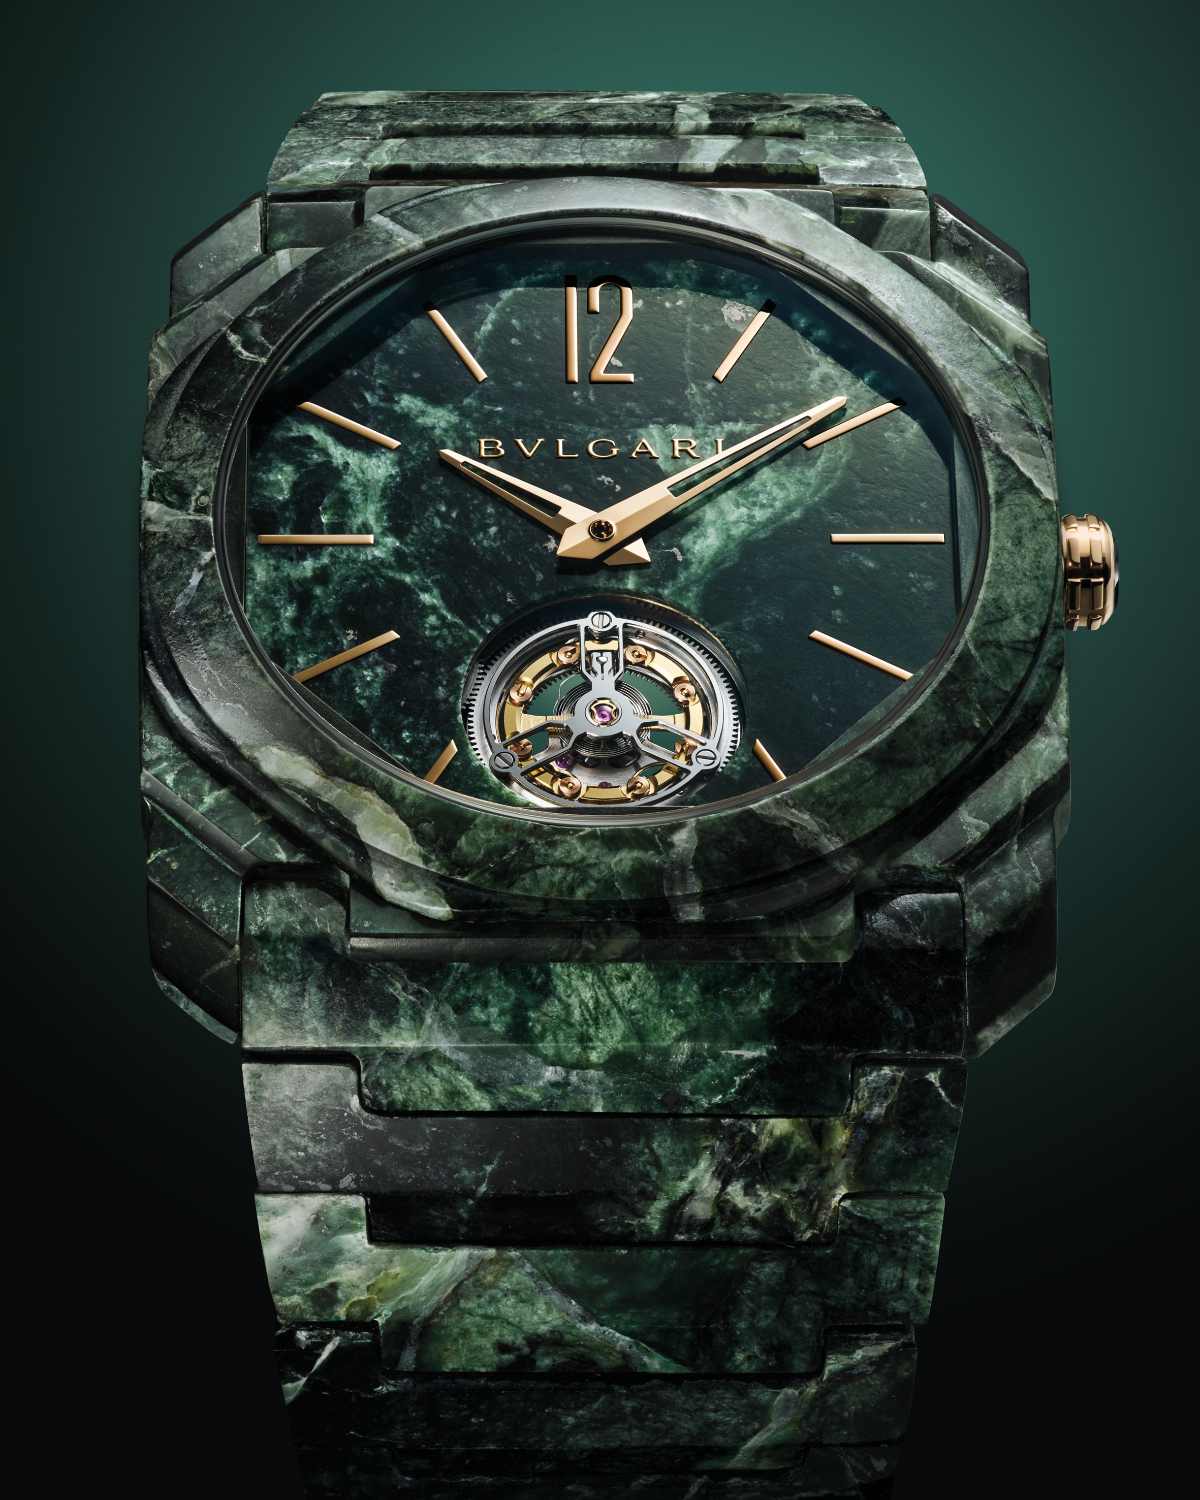 Bvlgari Presents Its Spectacular One-off Octo Finissimo Tourbillon In Marble